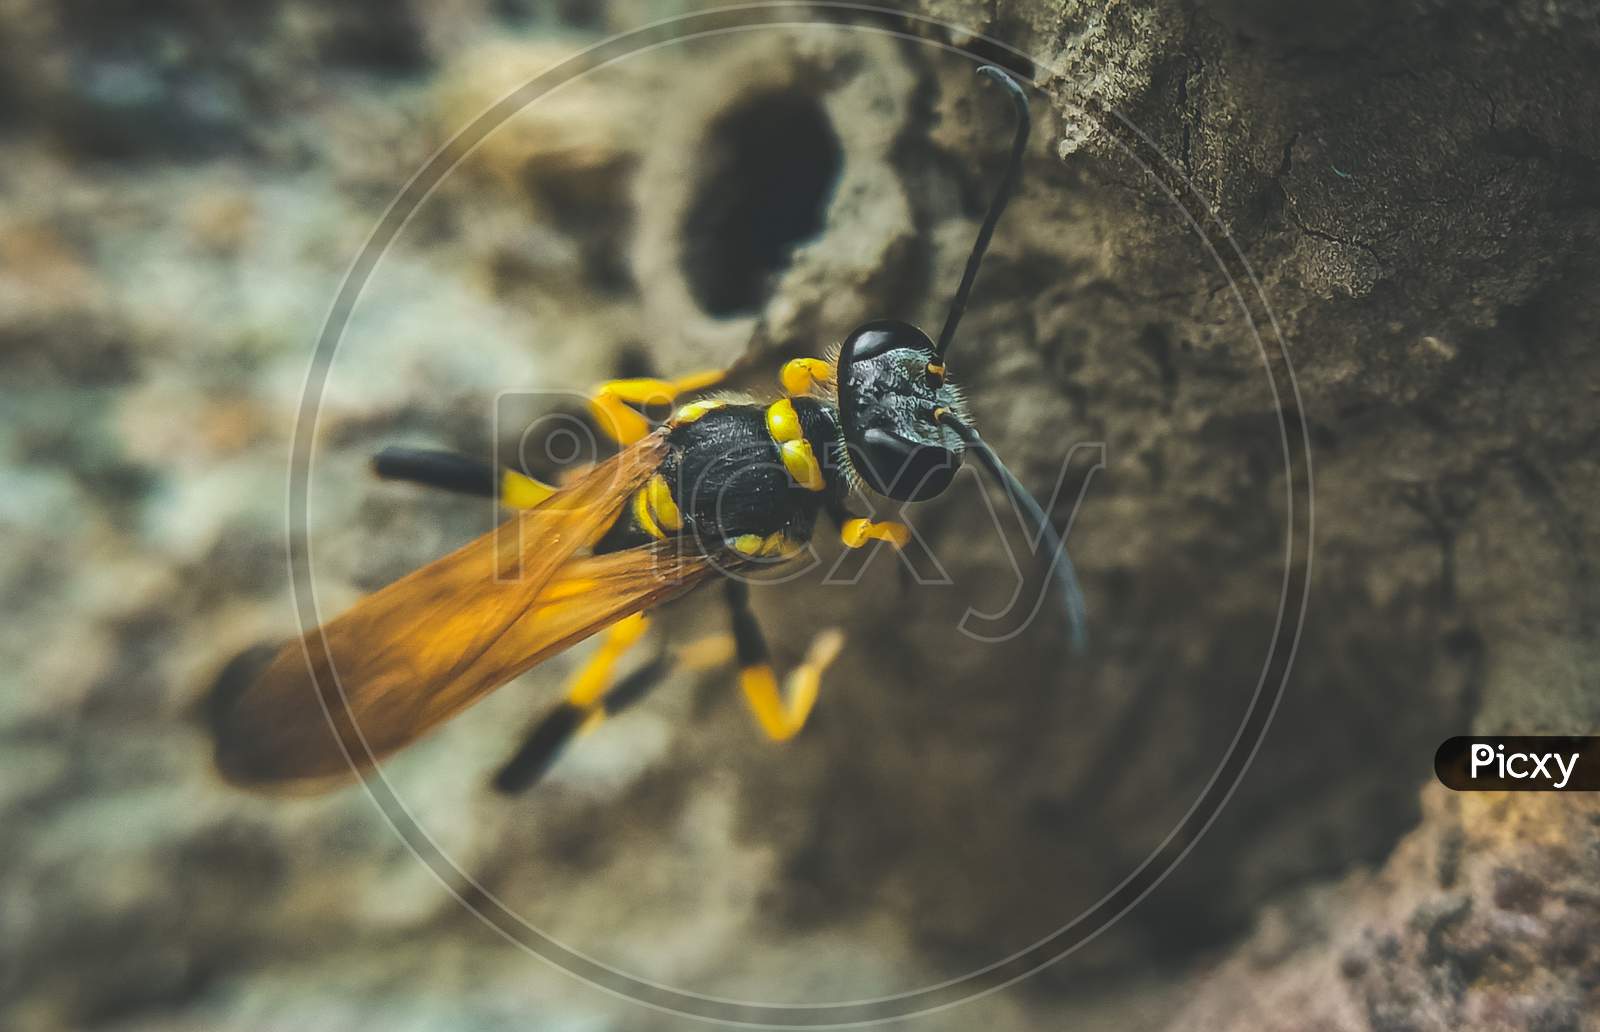 Closer view of wasp